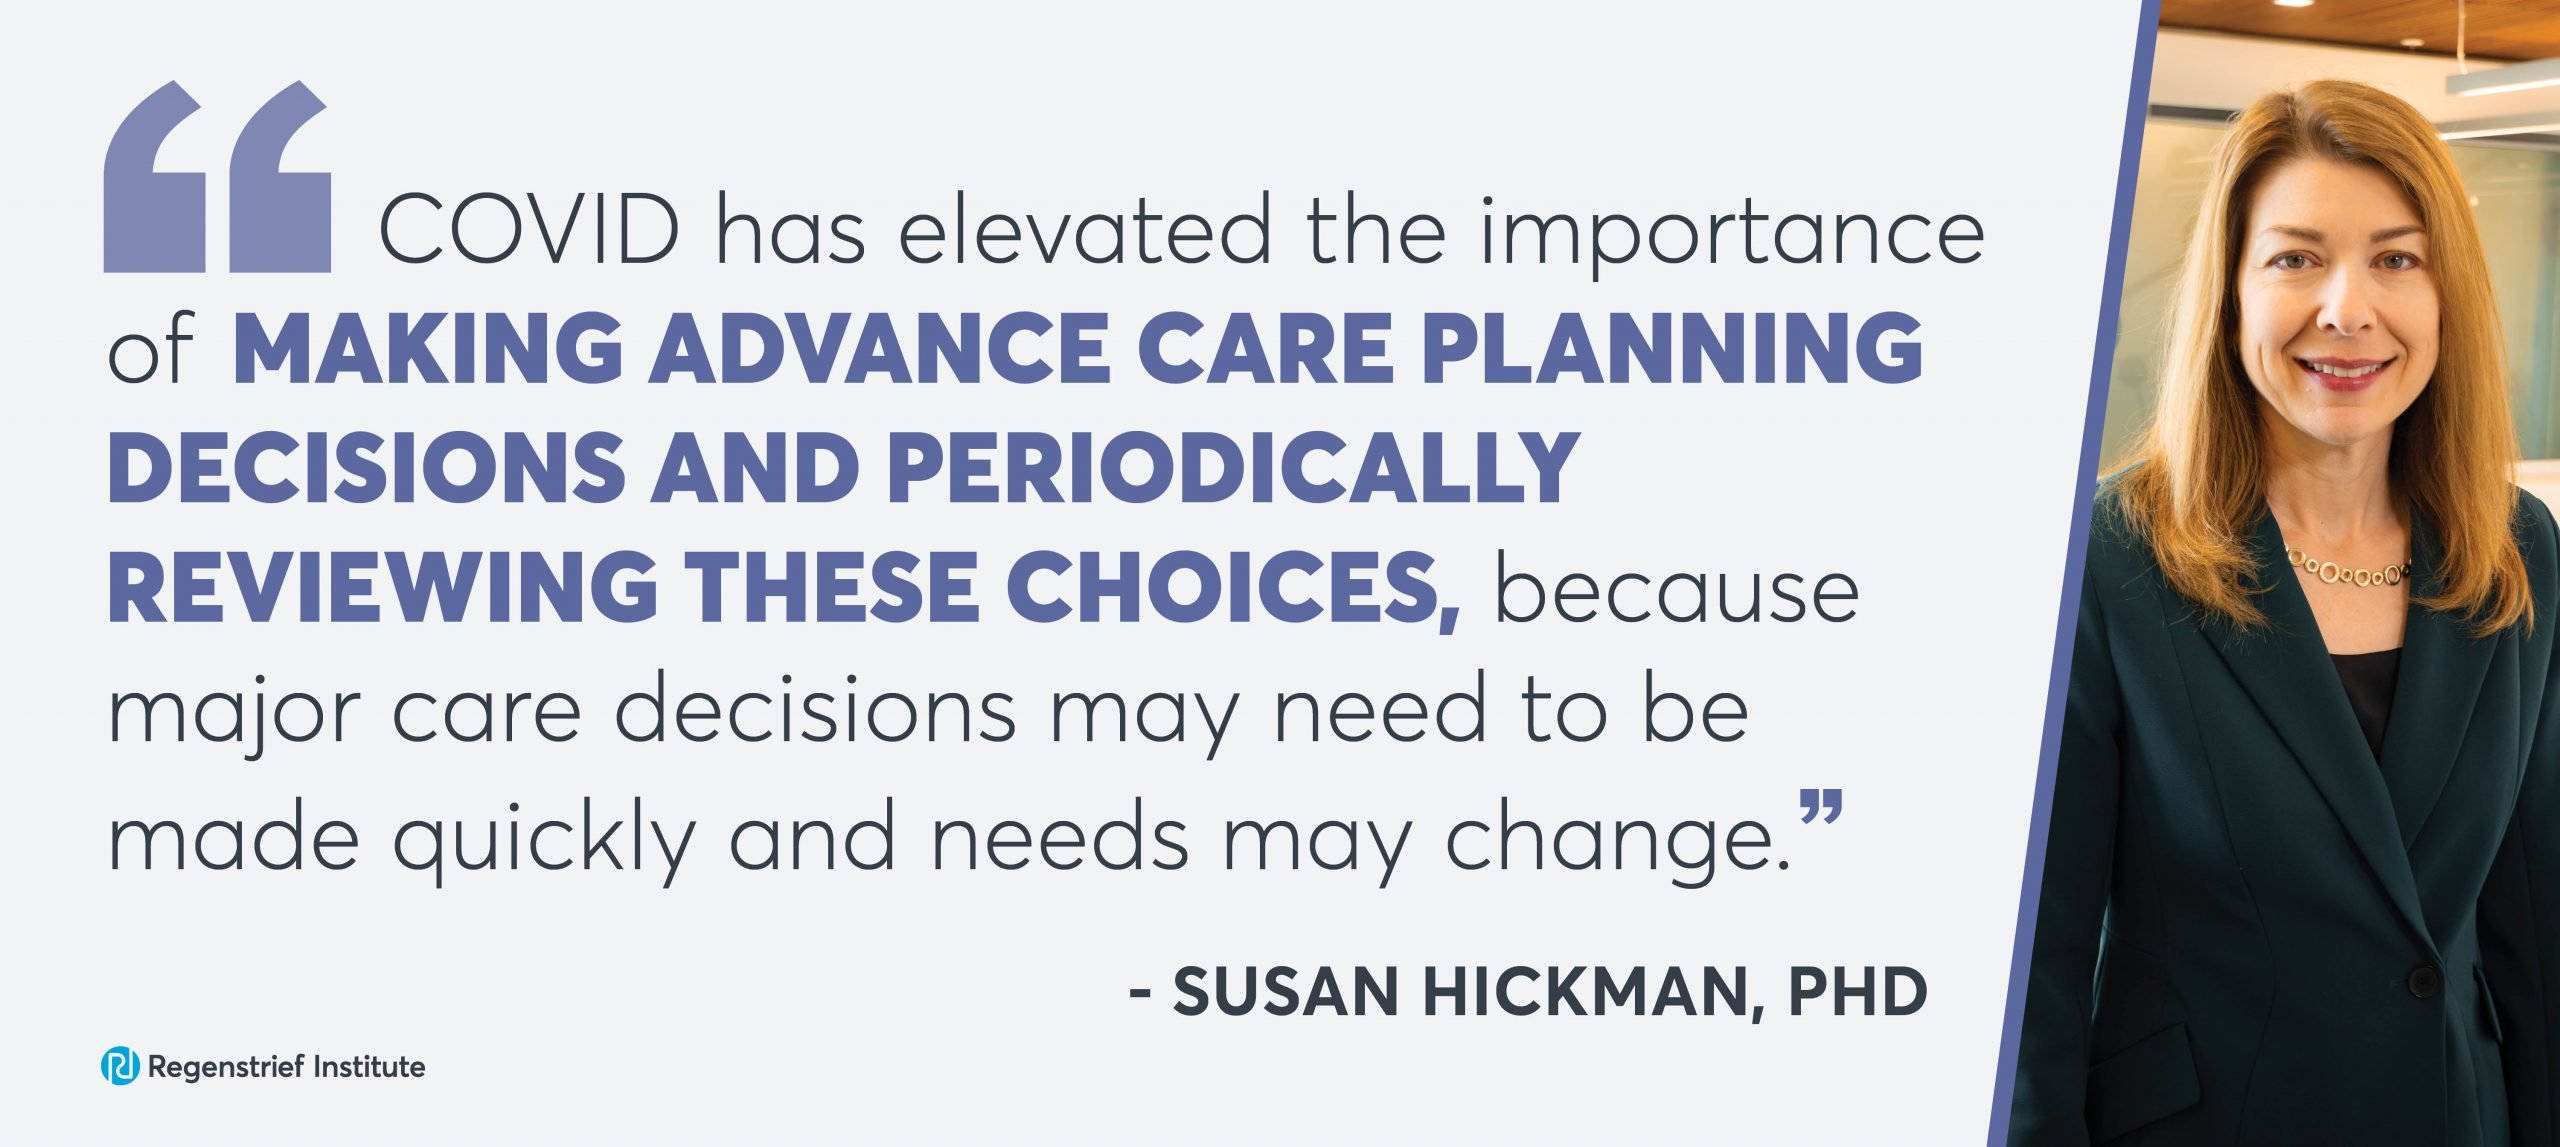 Quote from Susan Hickman: COVID has elevated the importance of making advance care planning decisions and periodically reviewing these choices because major care decisions may need to be made quickly and needs may change.